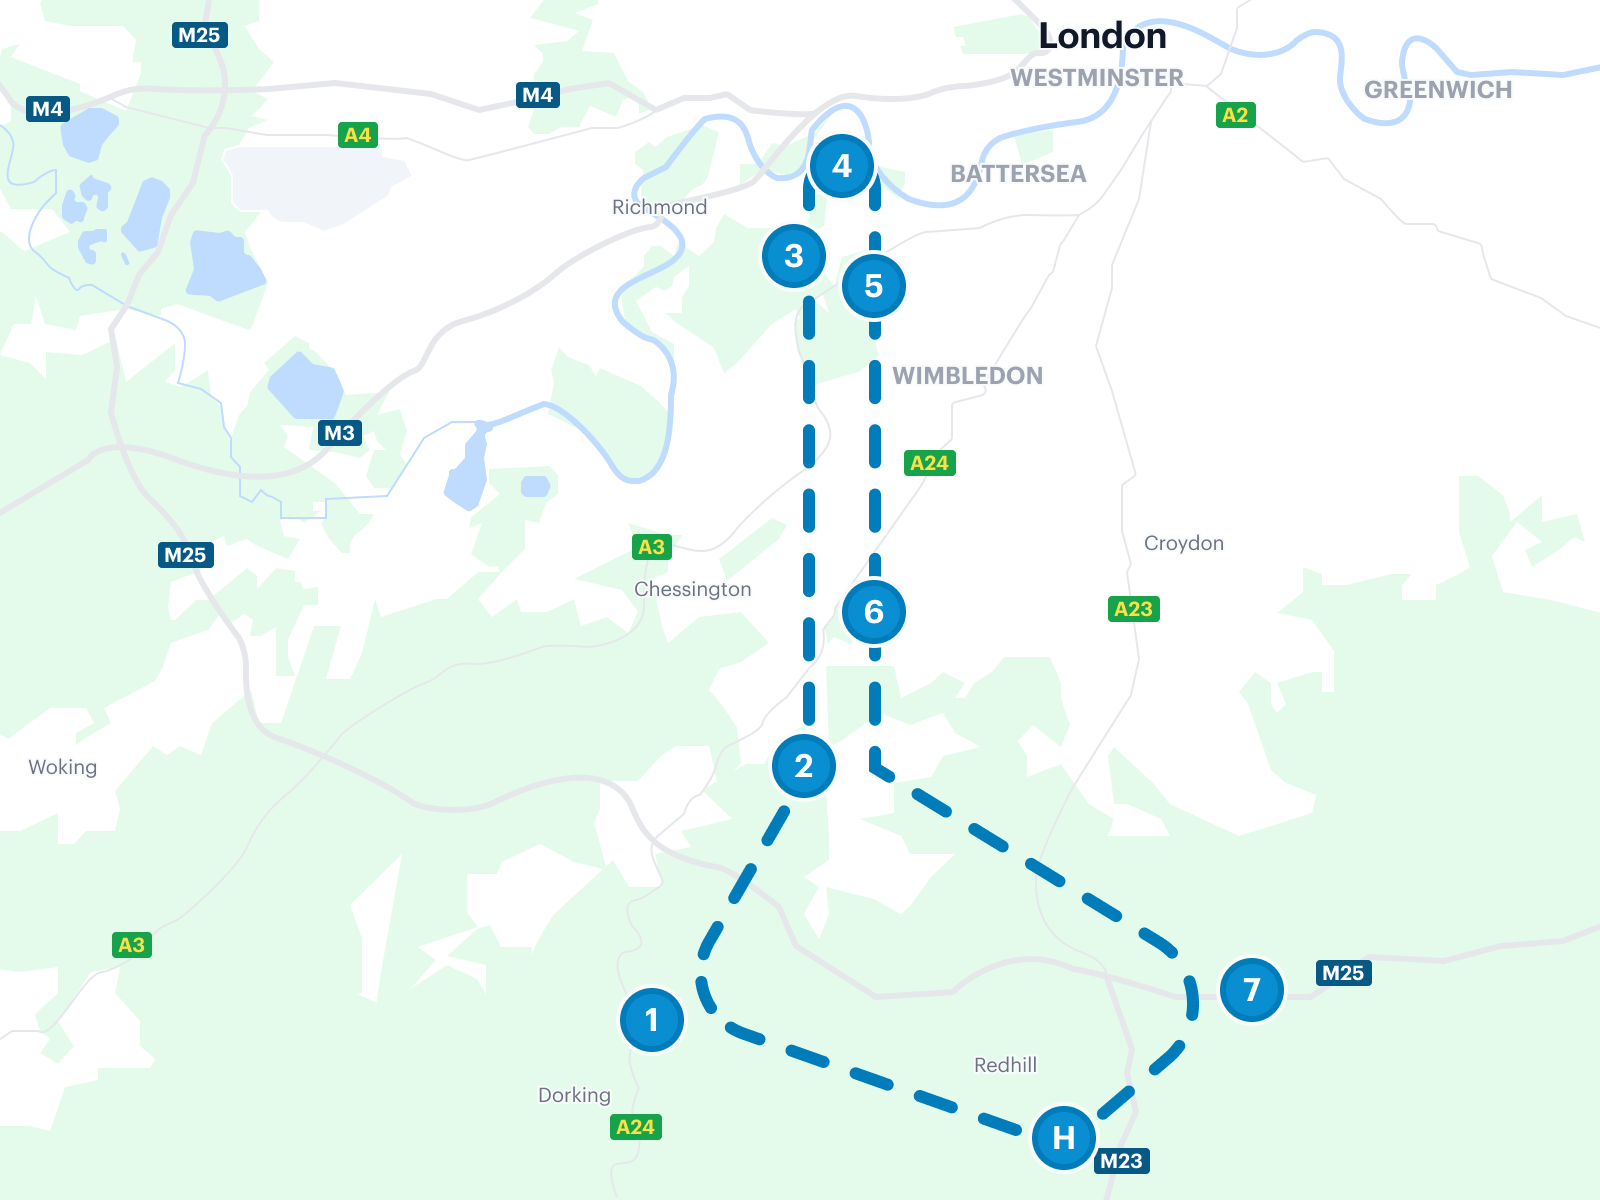 Route Map of London Skyline